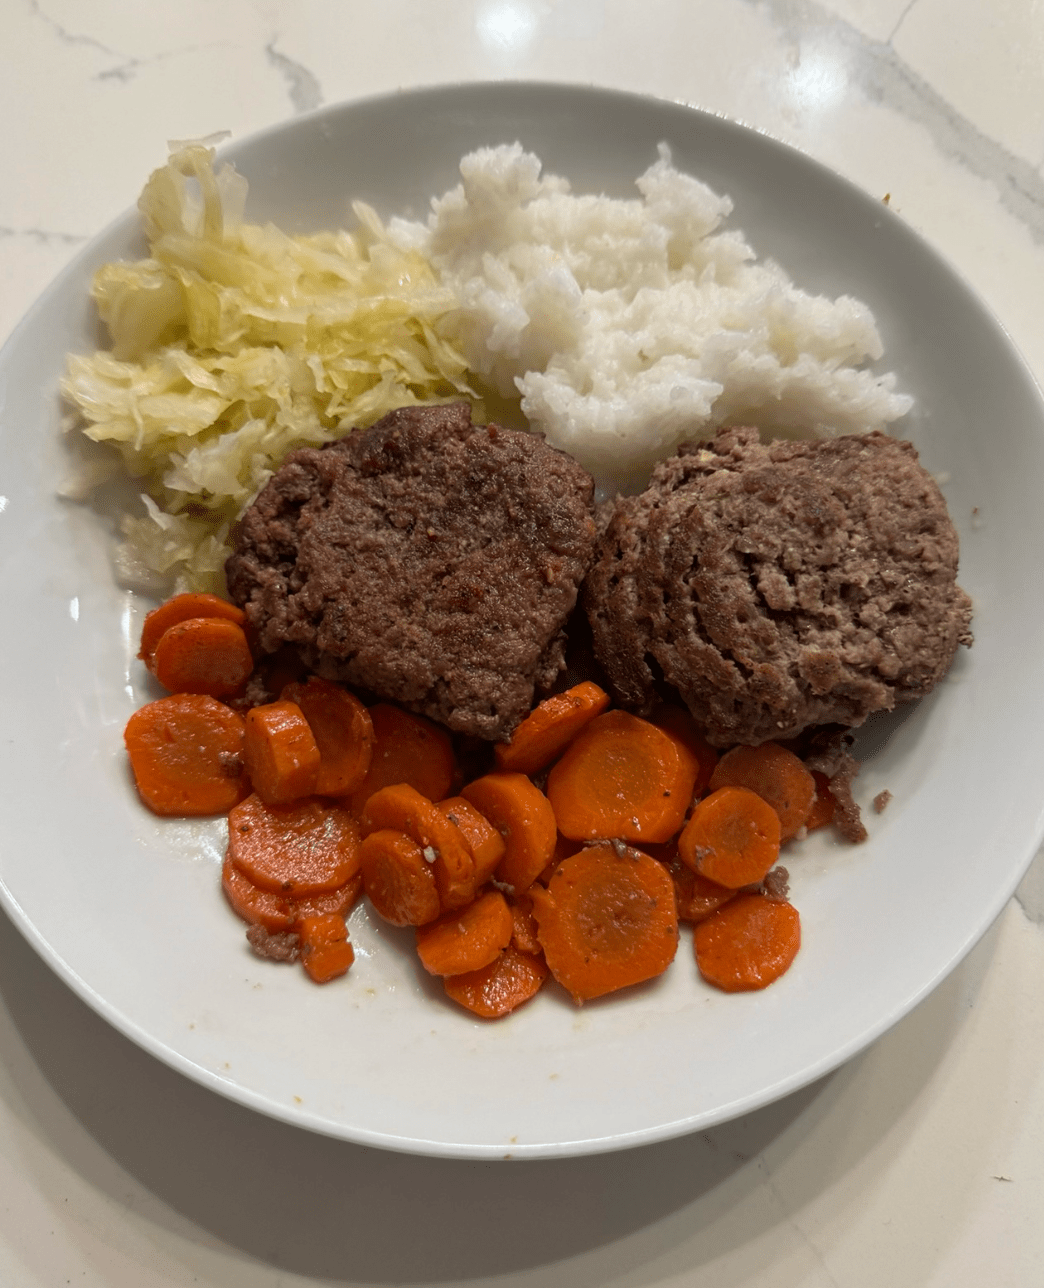 Beef patties, carrots, rice, and sauerkraut on a white plate